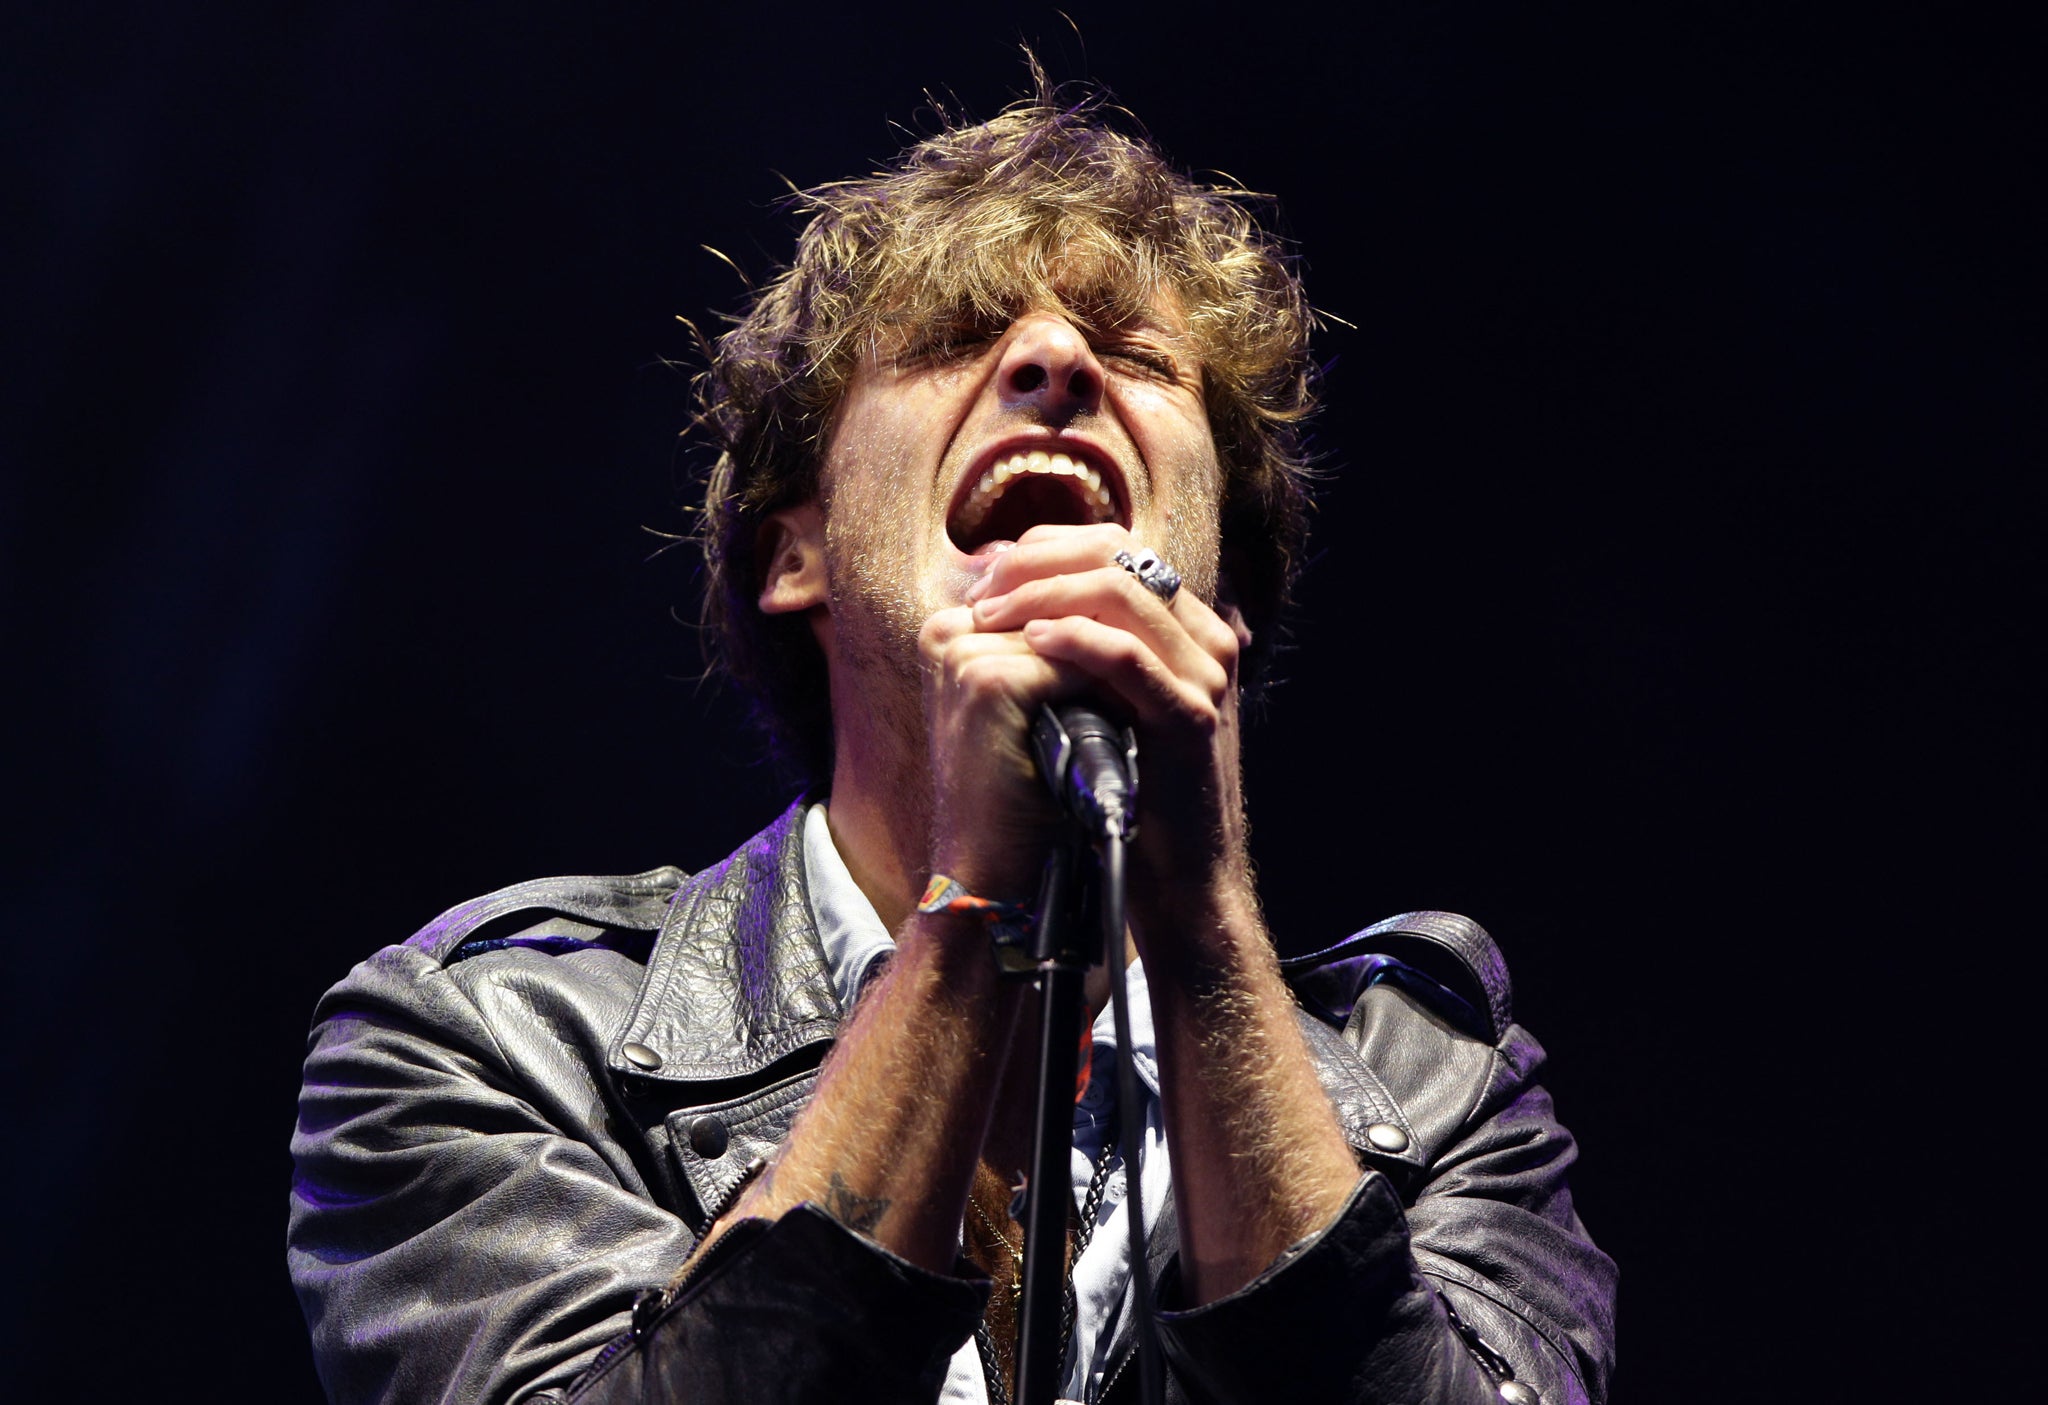 Paolo Nutini performs at T in the Park